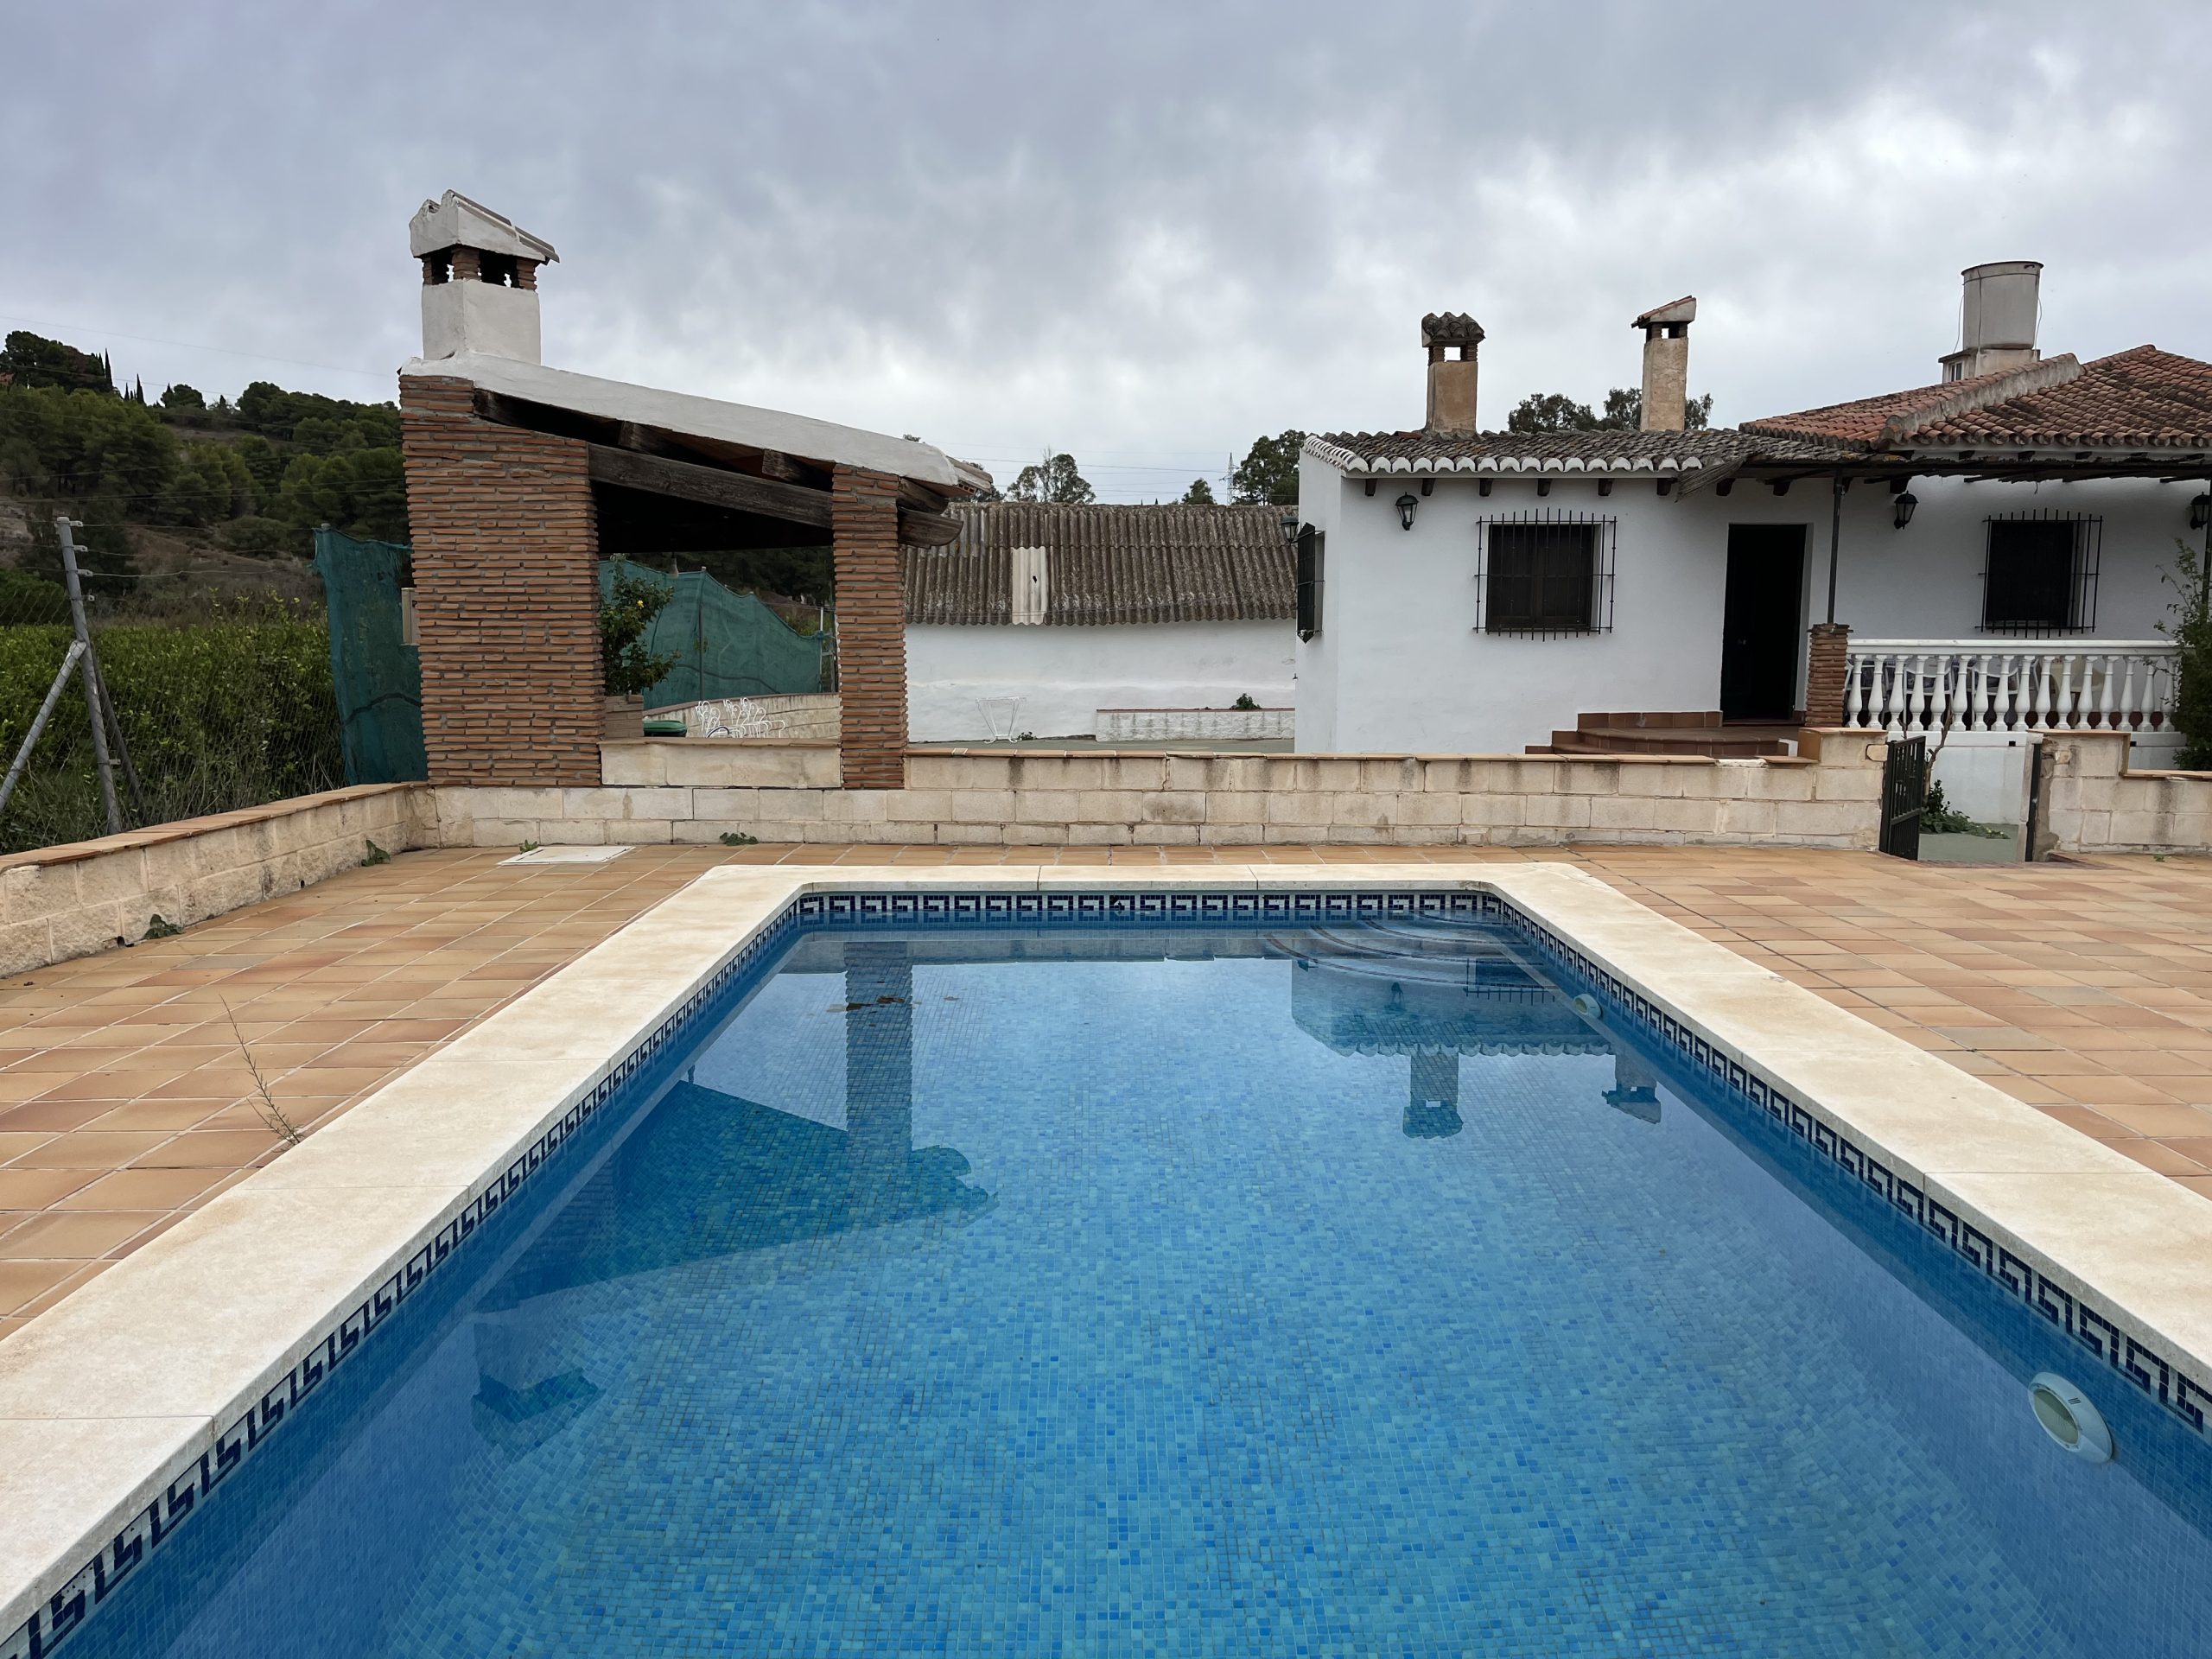 Ri 843 Two bedroom country house with pool near Pizarra – 900€